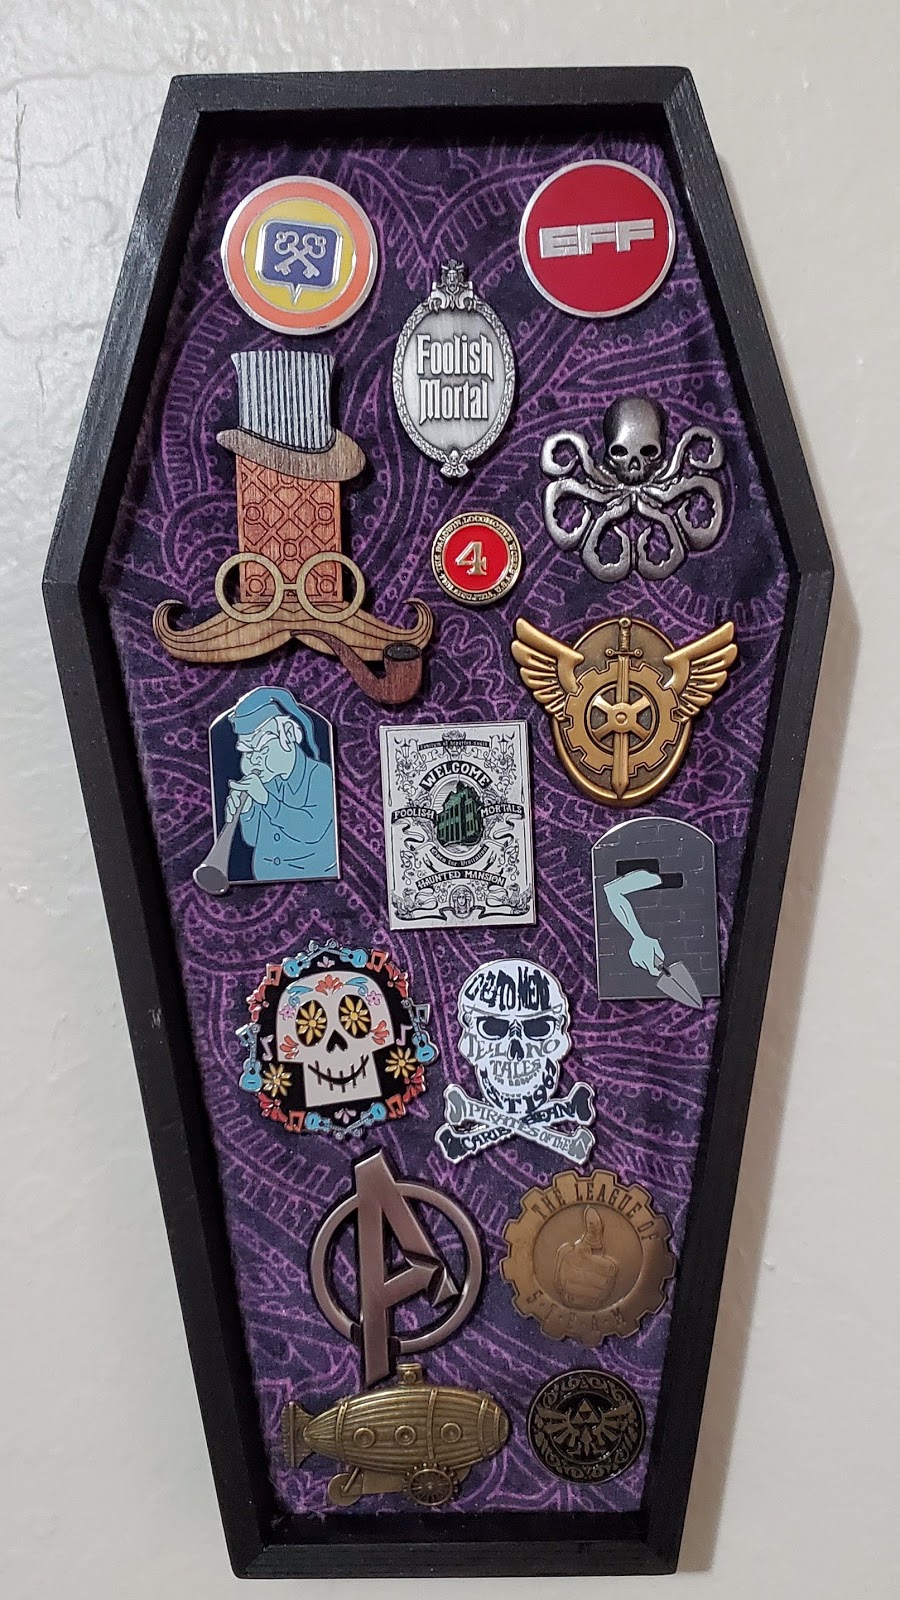 Pin on    Finds! PIN FOR PIN BOARD! *